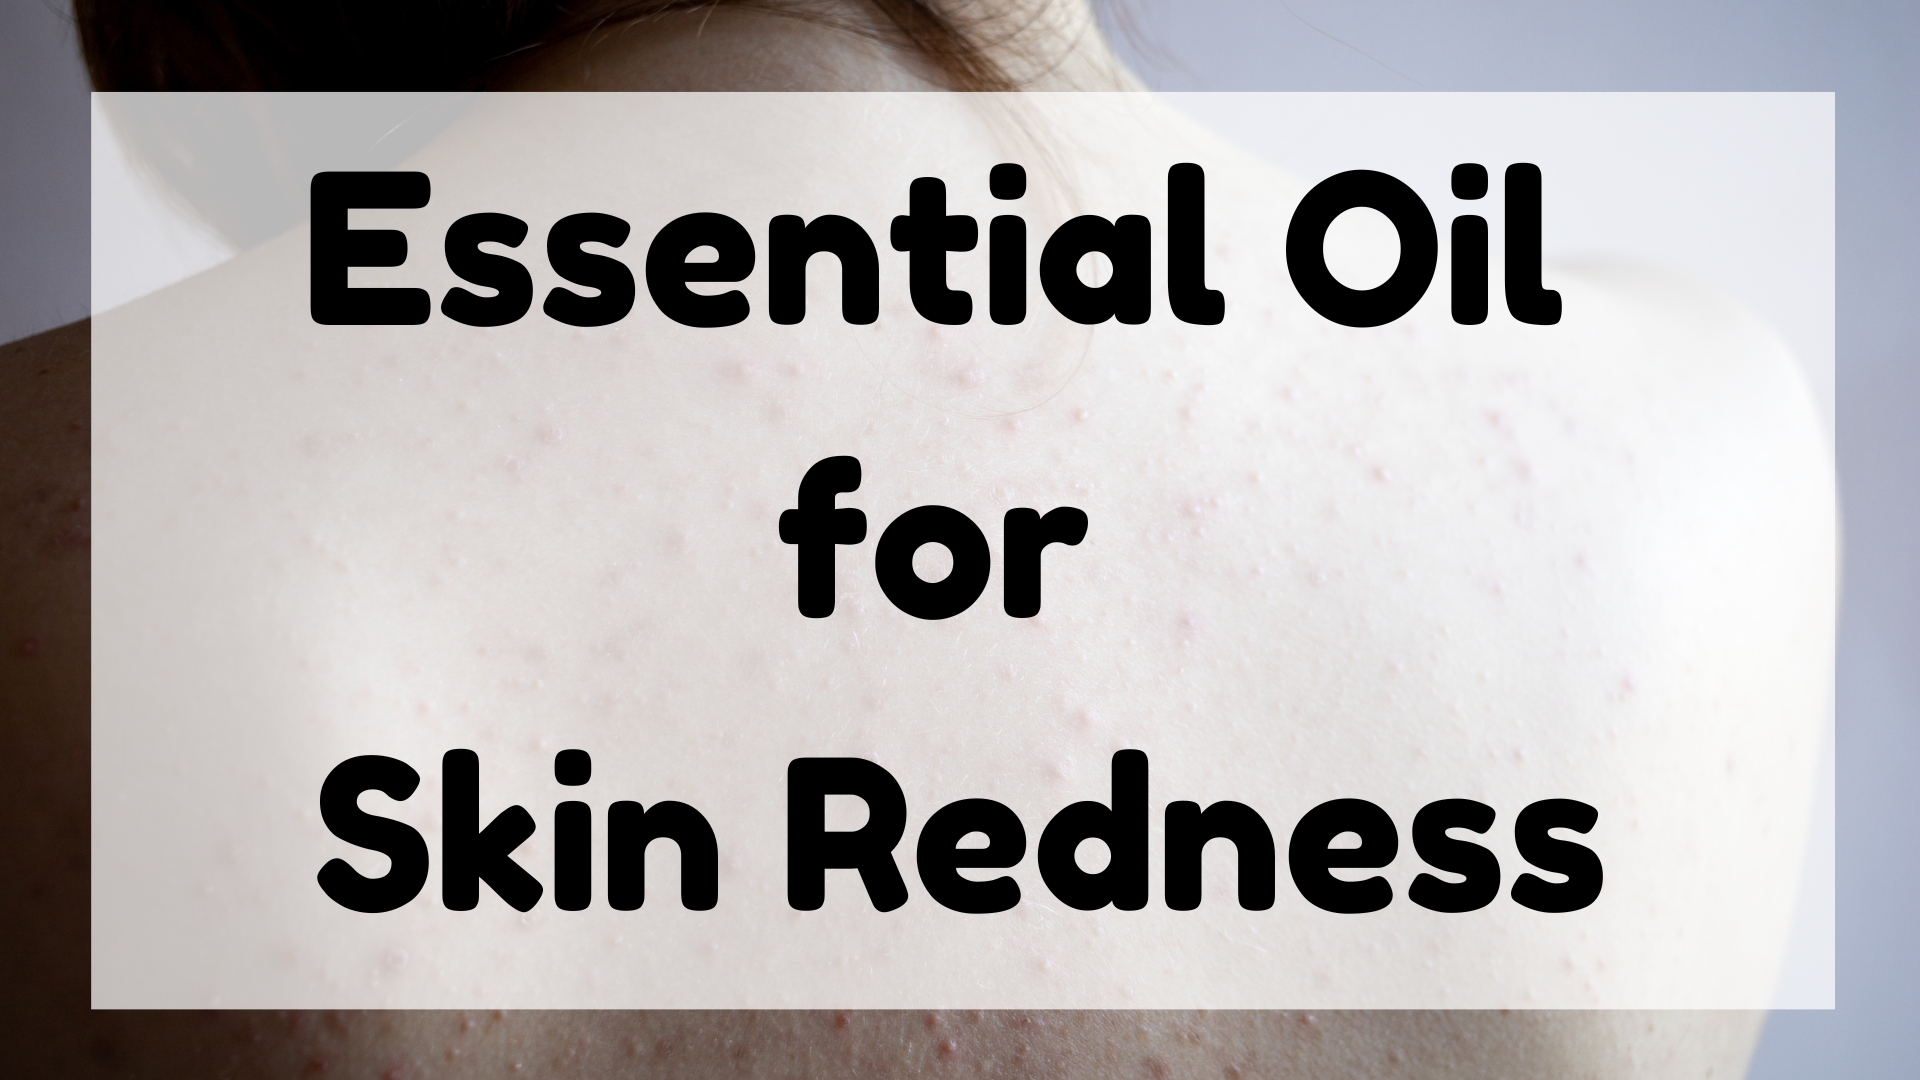 Essential Oil for Skin Redness featured image